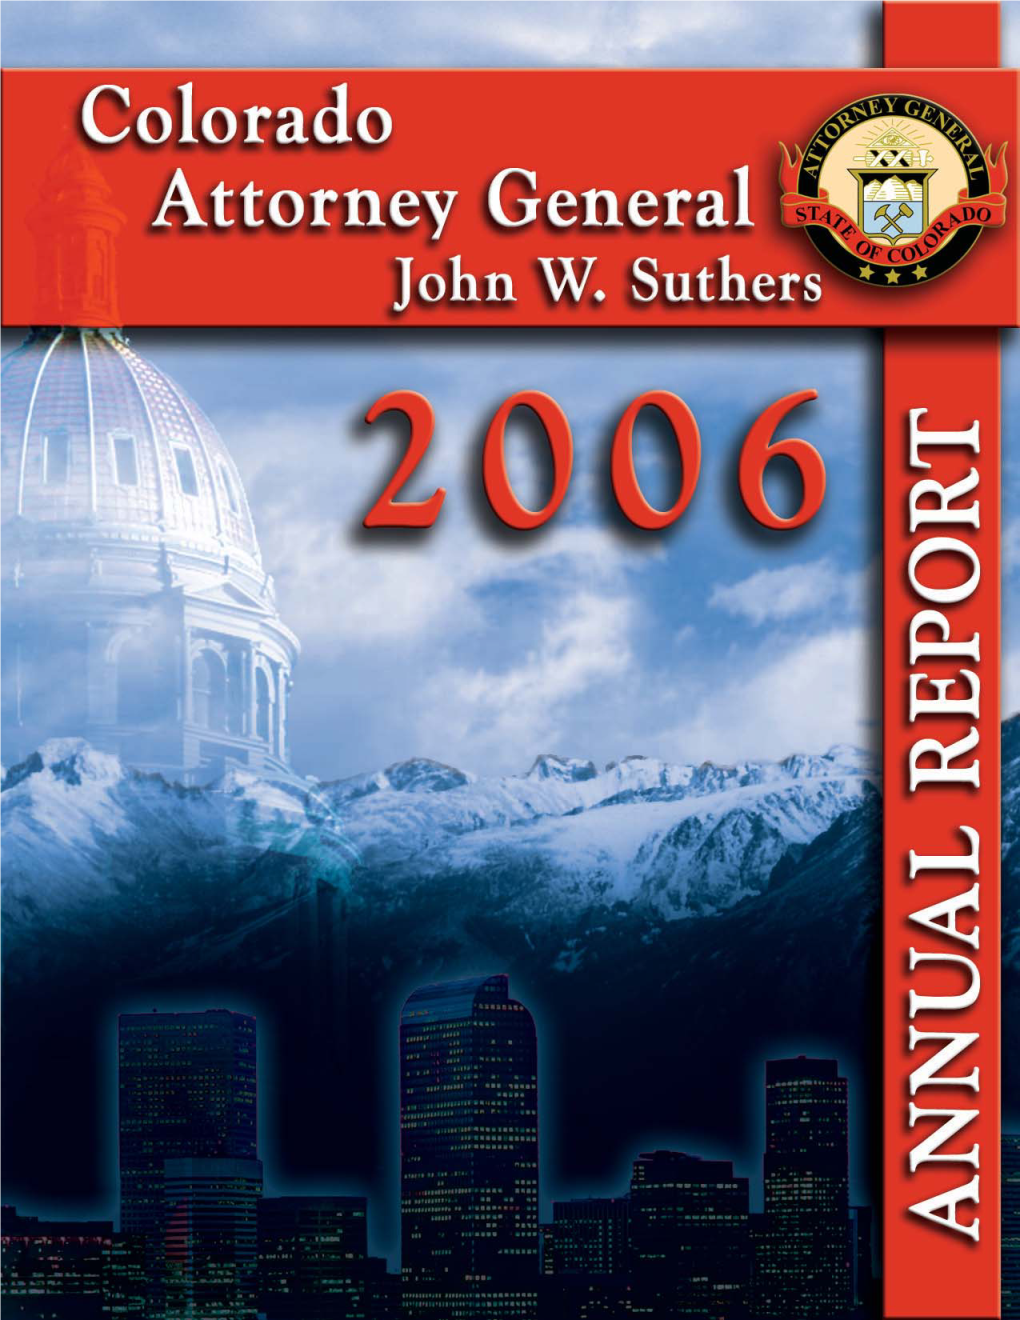 2006, the Voters of Colorado Elected Attorney General Suthers by a Large Margin to Serve a Full, Four-Year Term